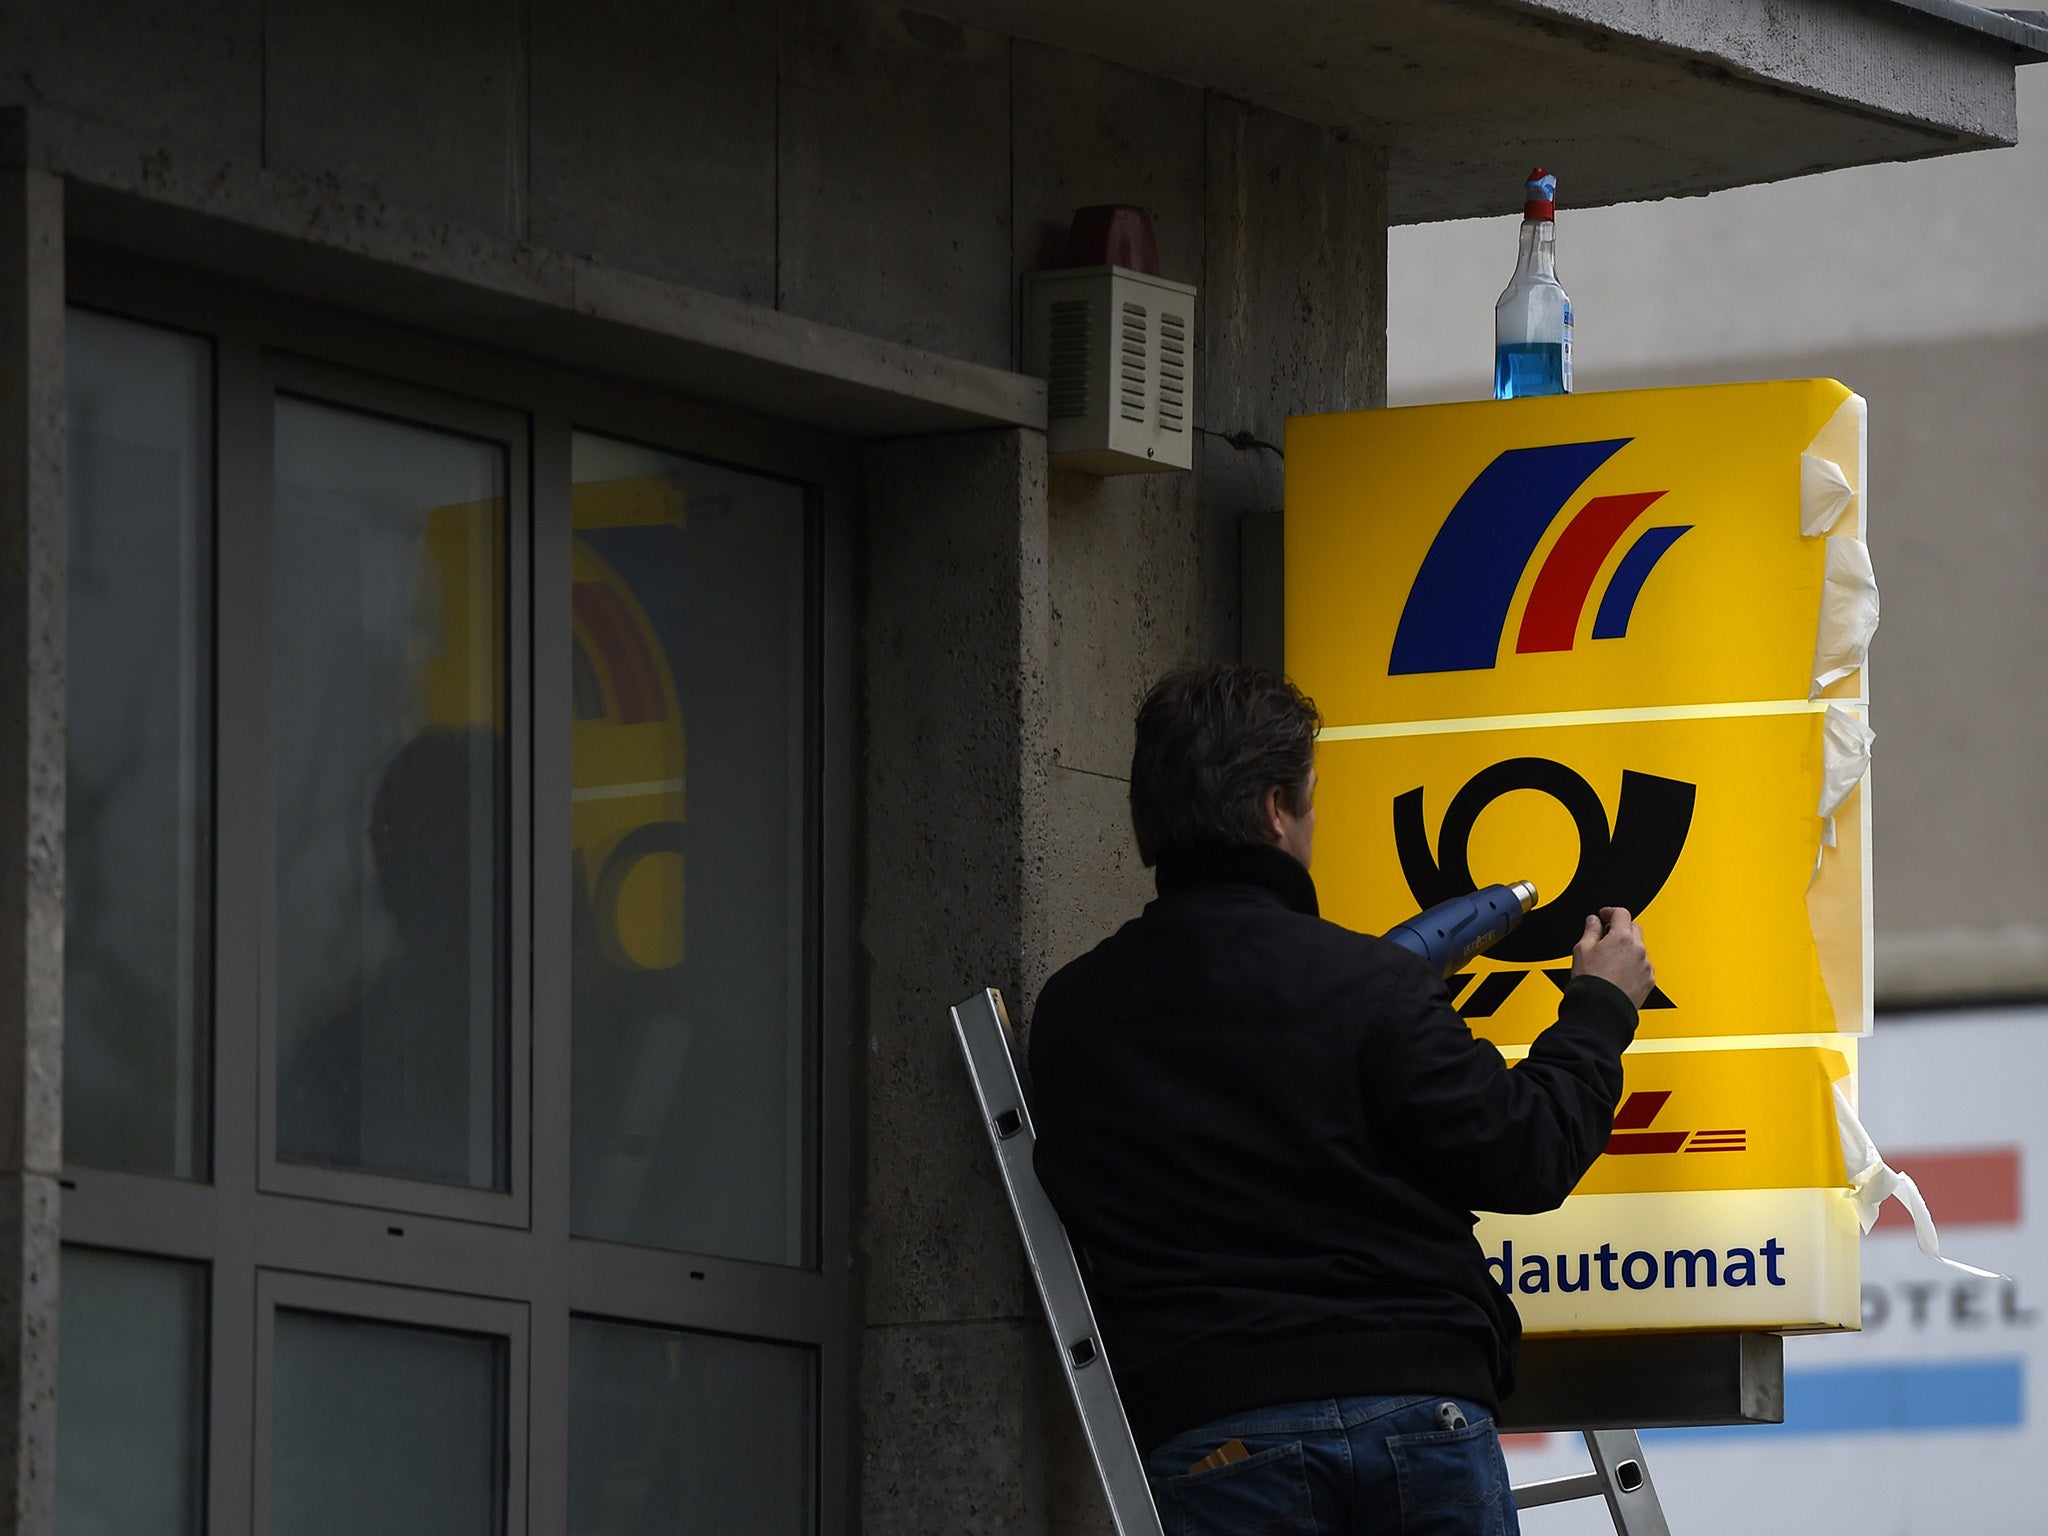 Deutsche Post workers accidentally rejected British postal ballots because they did not comply with German envelope rules